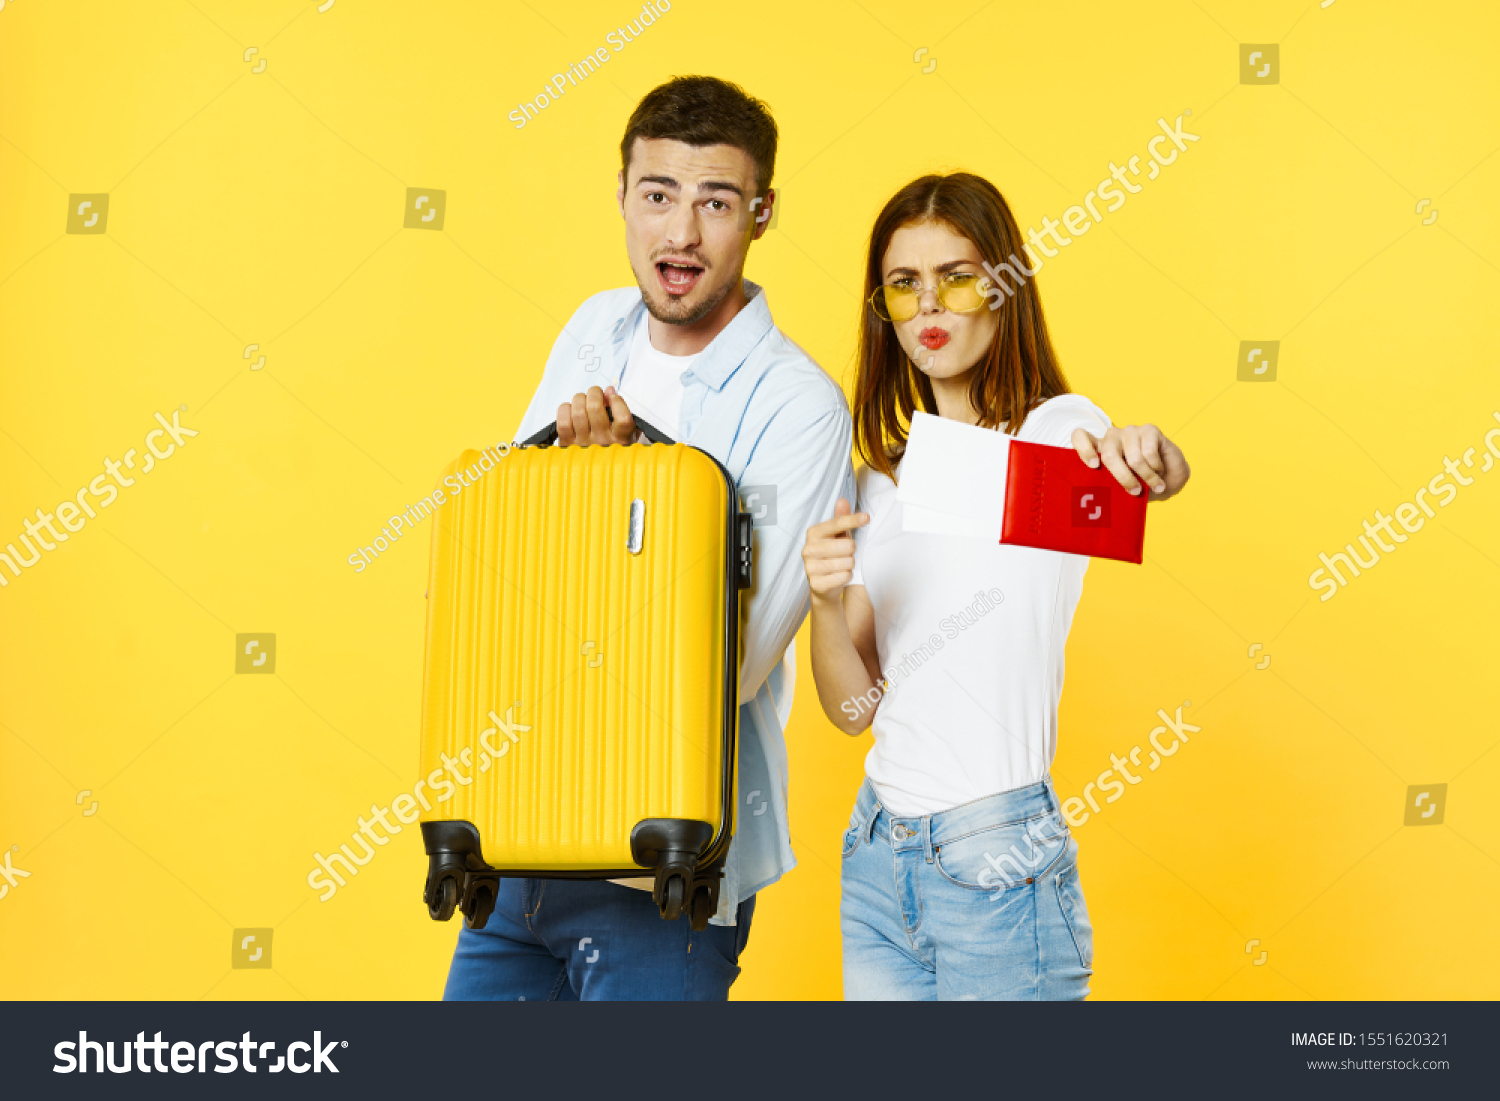 Cheerful man and woman suitcase passport and airplane ticket #1551620321